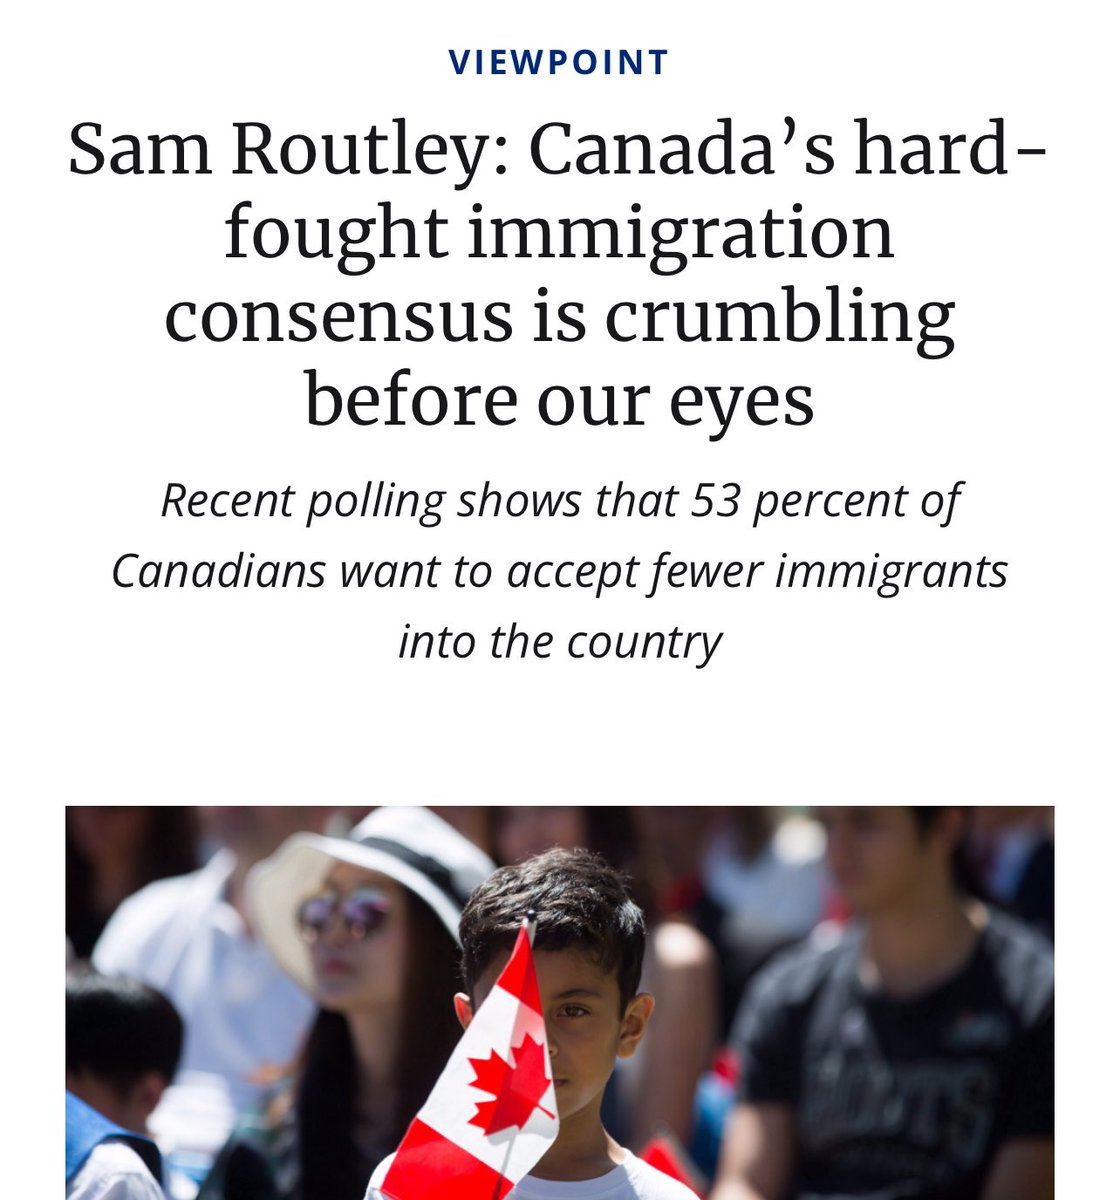 Sam Routley: Canada’s hard-fought immigration consensus is crumbling before our eyes And yet: “Other than marginal voices like the People’s Party of Canada, no one person or political movement in the country really challenges the overall value or principle of mass immigration.”…